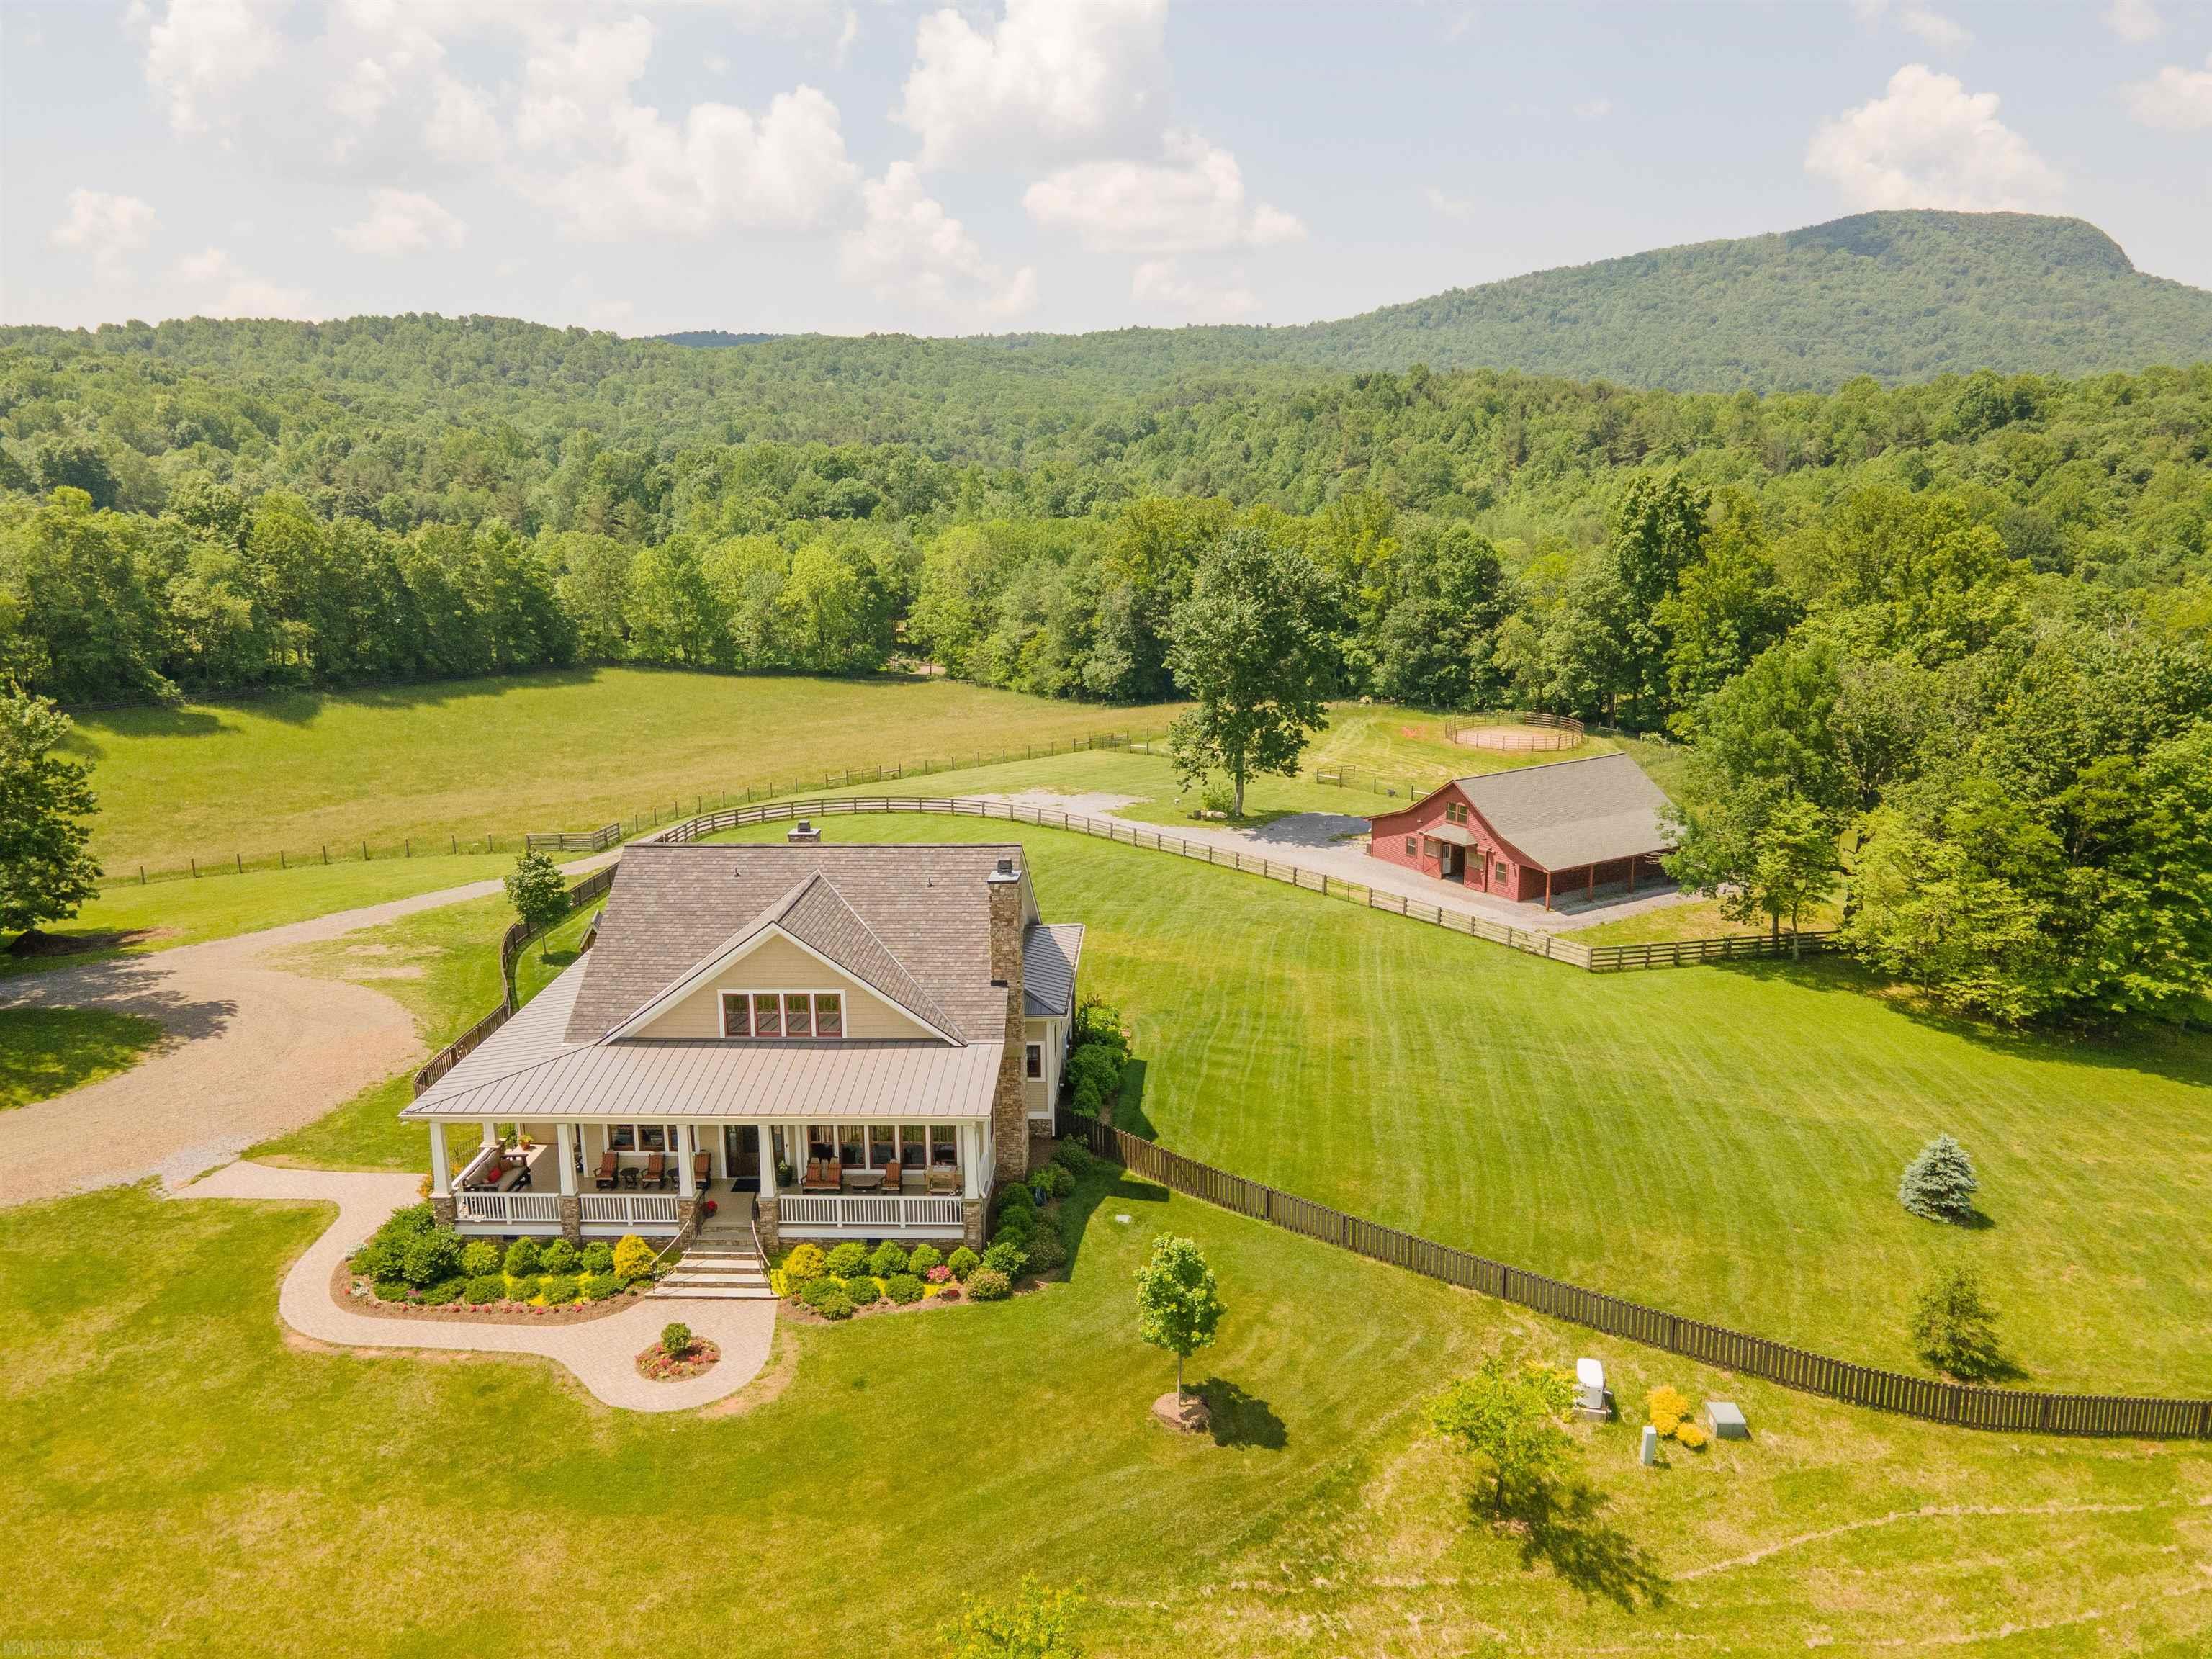 Welcome home to this spectacular horse property nestled in the Blue Ridge Mountains near Floyd Virginia. Hailed by Southern Living and USA Today as one of the South's Best Small Towns. Four miles from the Parkway, close to wineries and the exclusive Primland Resort. With 105 gorgeous acres and stunning 360-degree mountain views, this farm has hosted weddings and horse clinics. Two luxury homes, two barns, upscale barn apartment and large arena. The primary residence, completed in 2017, boasts exquisite indoor-outdoor living at it's finest and breathtaking views from every room. High-end luxury finishes throughout create a warm atmosphere that make this home truly special. Guests will love the serene setting of the restored farmhouse. From the spring-fed bass pond to the apple orchard, this house has a charm all it's own. The main barn, built in 2020, is a horse lover's dream. Gorgeous floor-to-ceiling tongue-and-groove pine & air conditioned tack room, rubber pavers & wash stall.